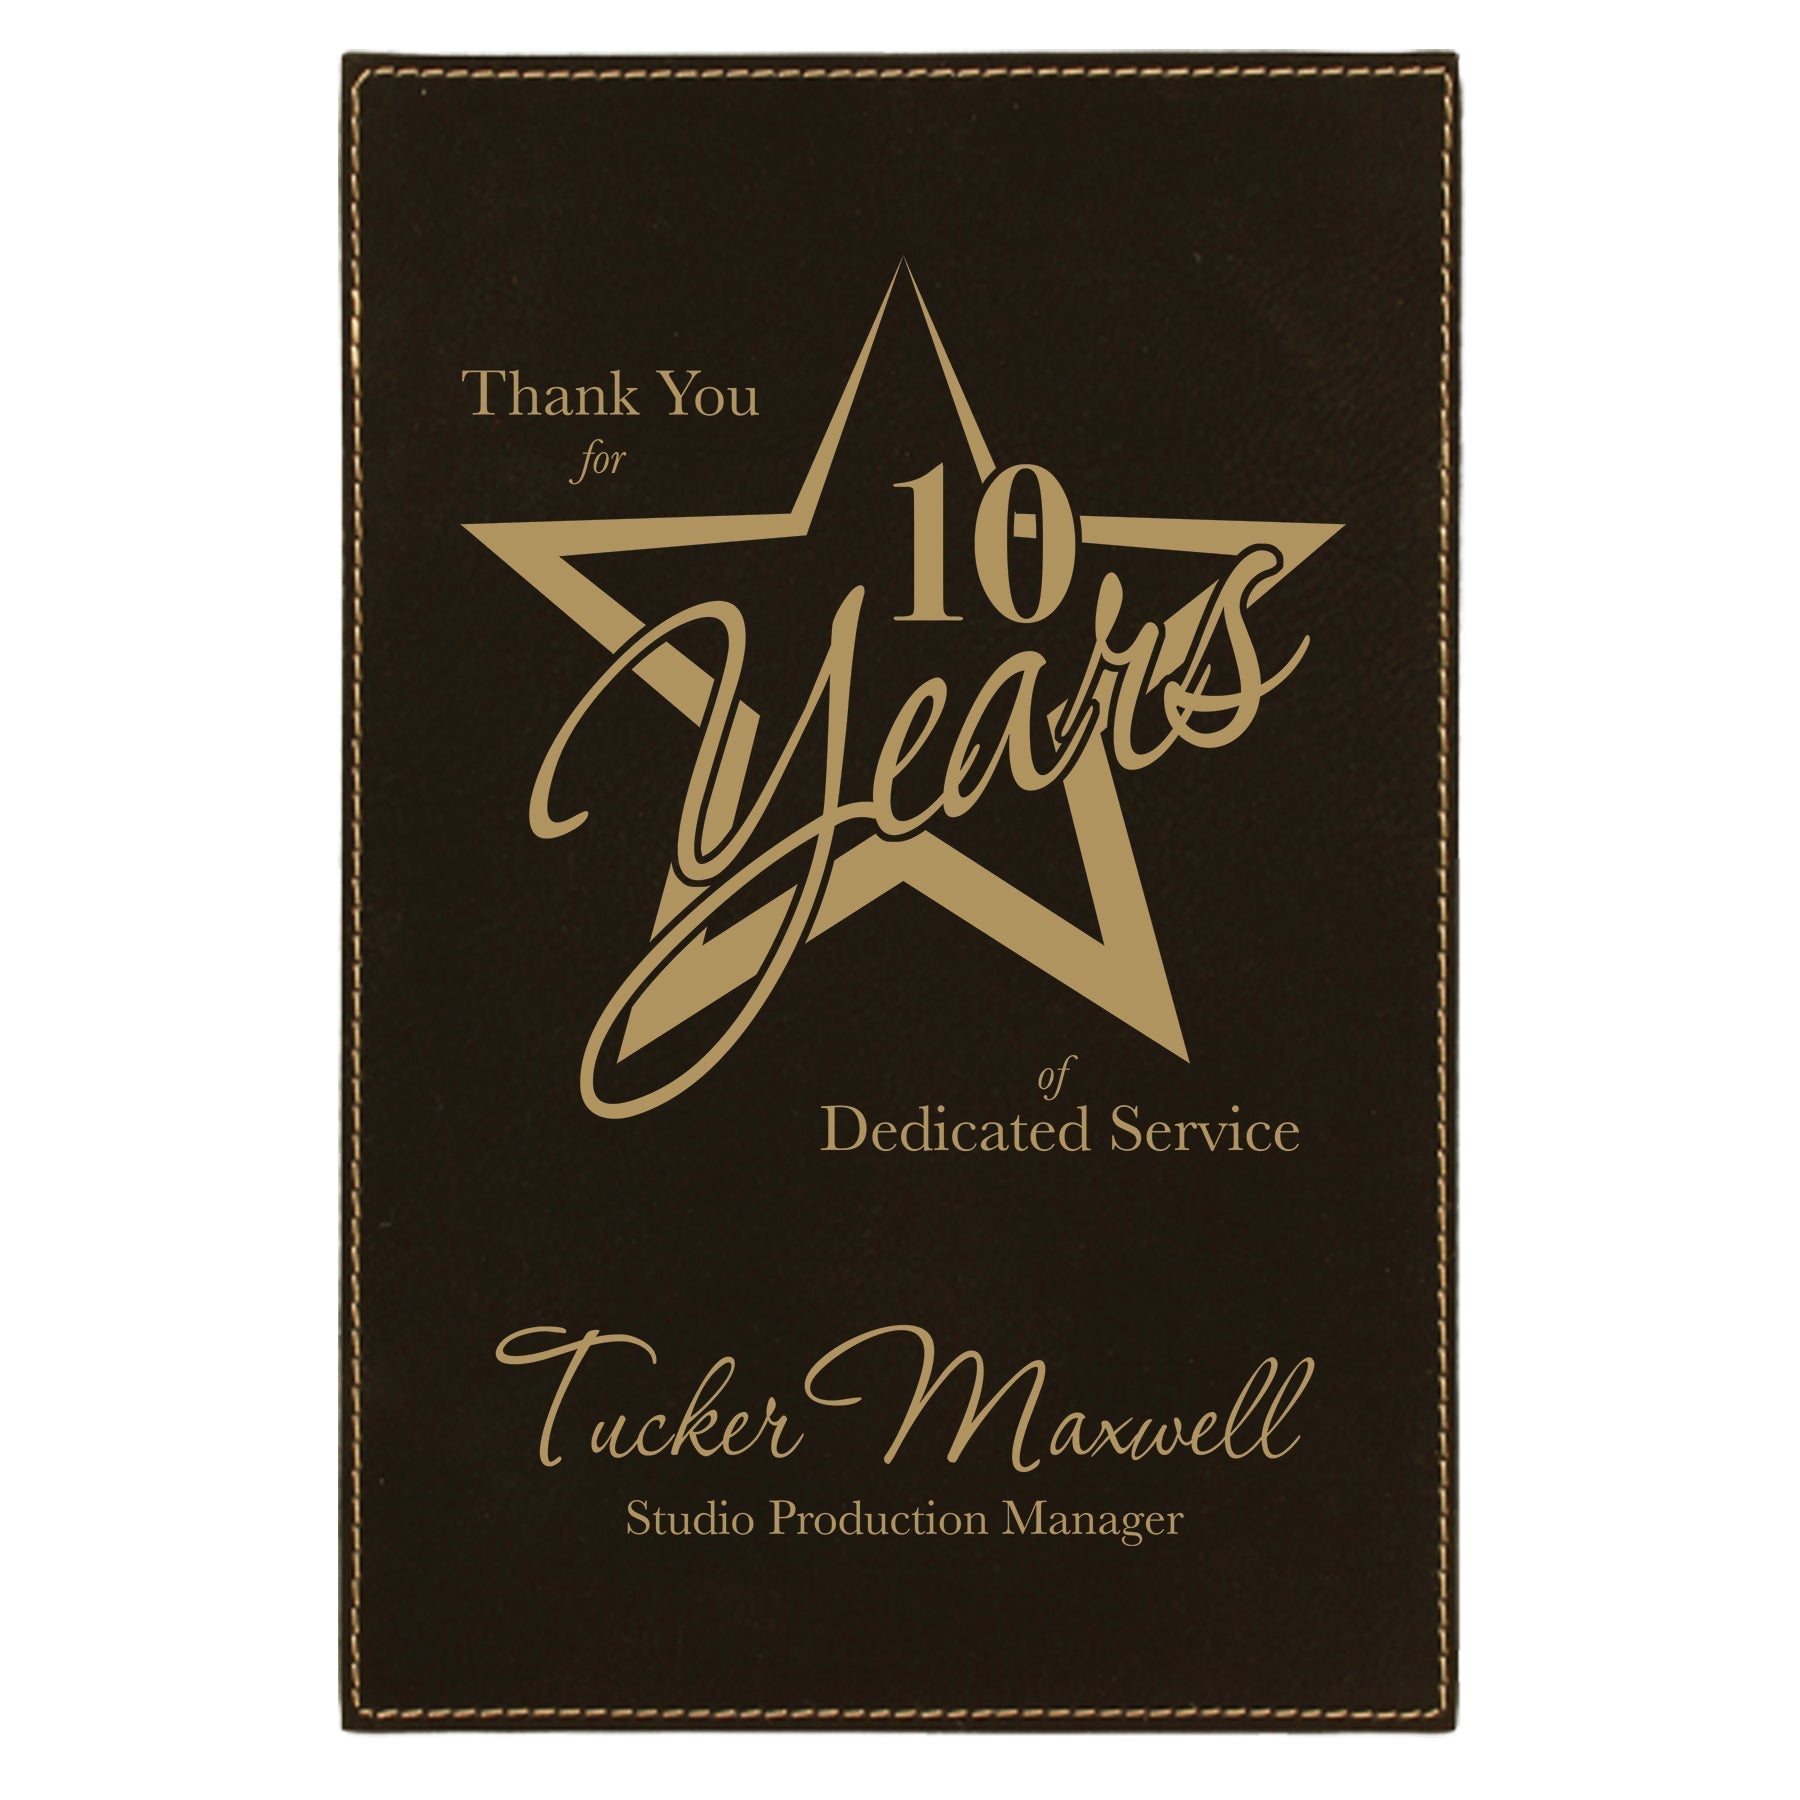 Plaque Plate, Laserable Leatherette, 5" x 7", Laser Engraved Plaque Plate Craftworks NW Black/Gold 